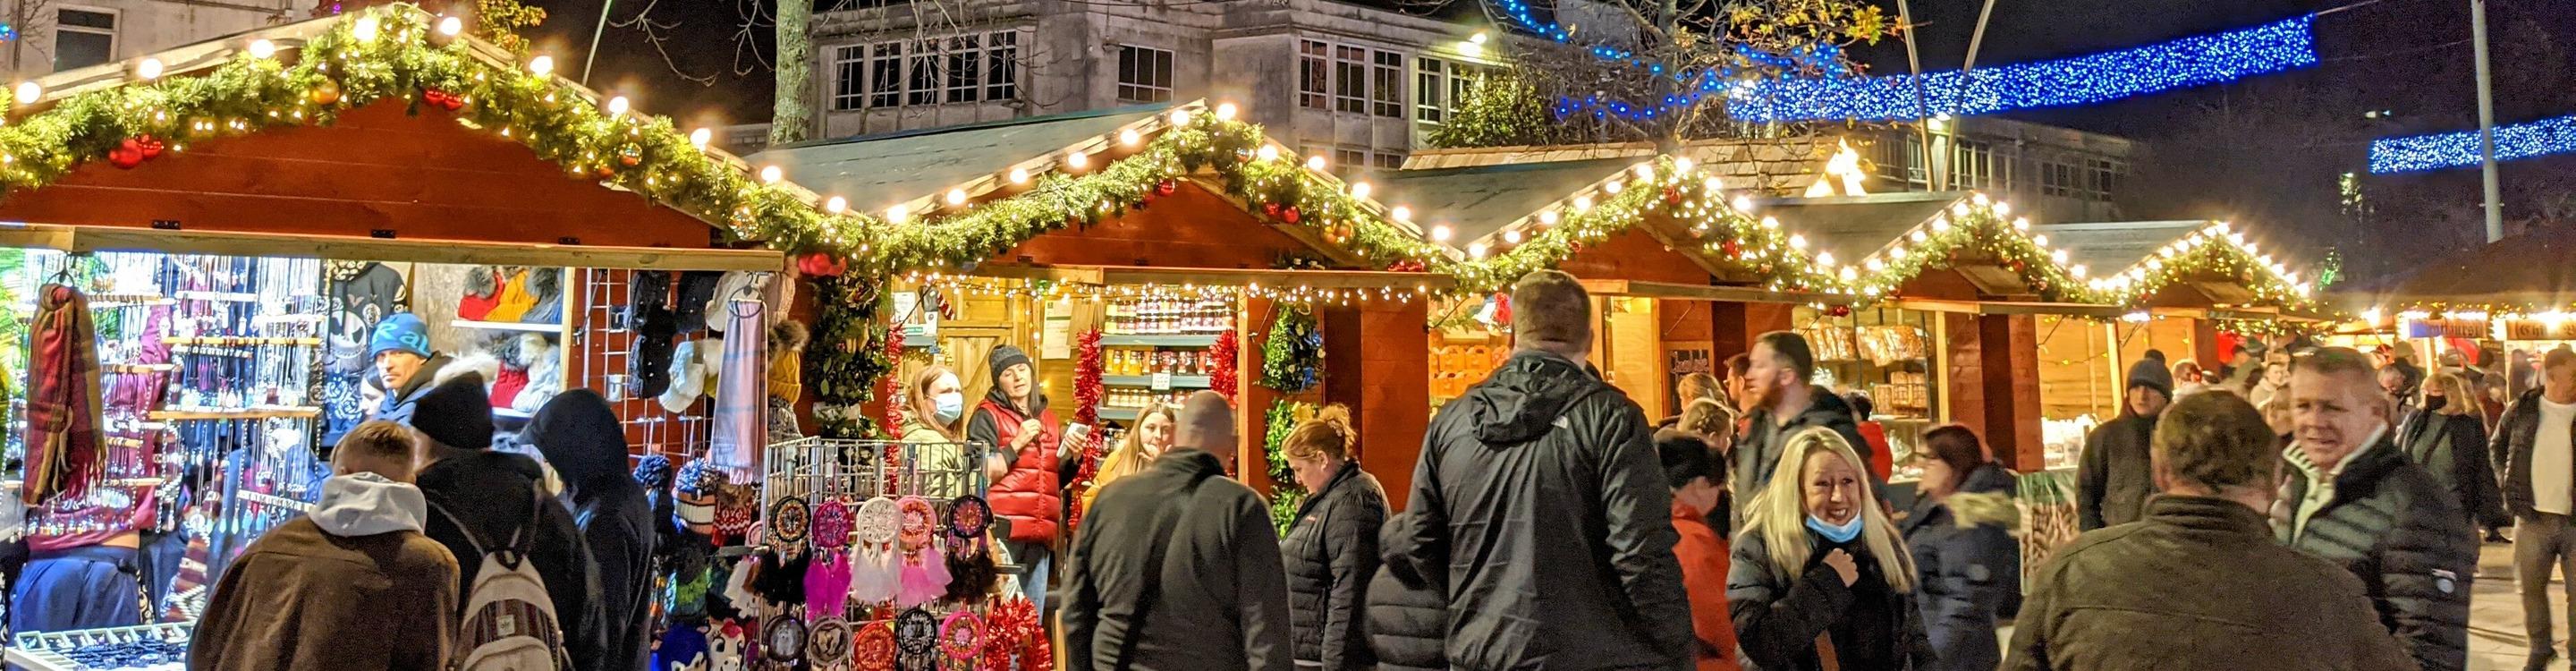 Crowds gathering outside Christmas stalls at the Plymouth Christmas Market